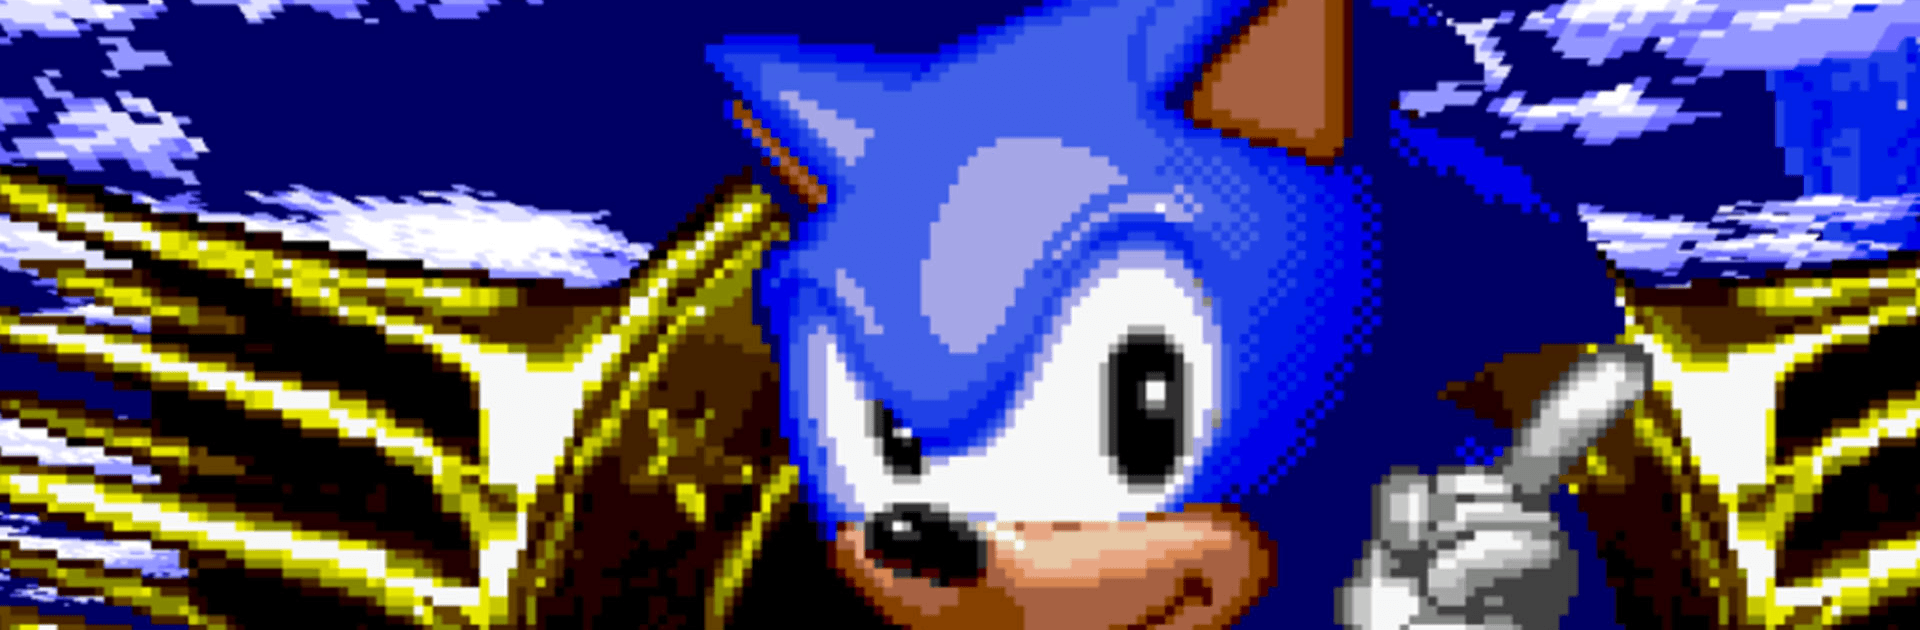 Download Sonic CD Classic App for PC / Windows / Computer